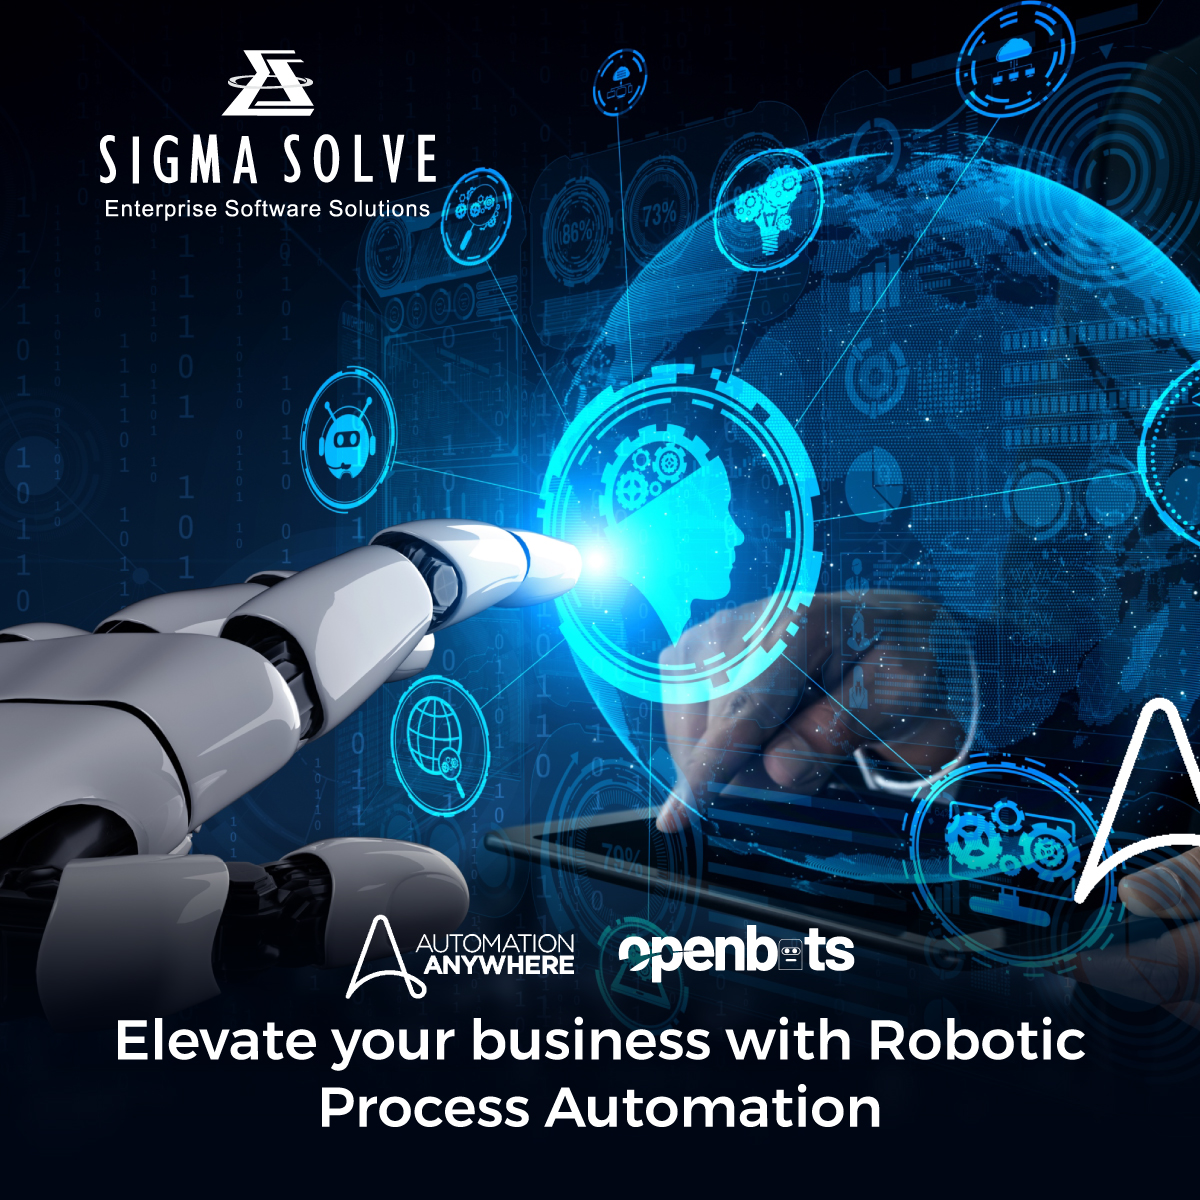 Discover the transformative power of Robotic Process Automation for your organization with Sigma Solve!

Contact us➡️sigmasolve.com

Drop a mail at 📩sales@sigmasolve.com or call us at 📞678-926-9725

#RPA #rpaservices #sigmasolve #roboticprocessautomation